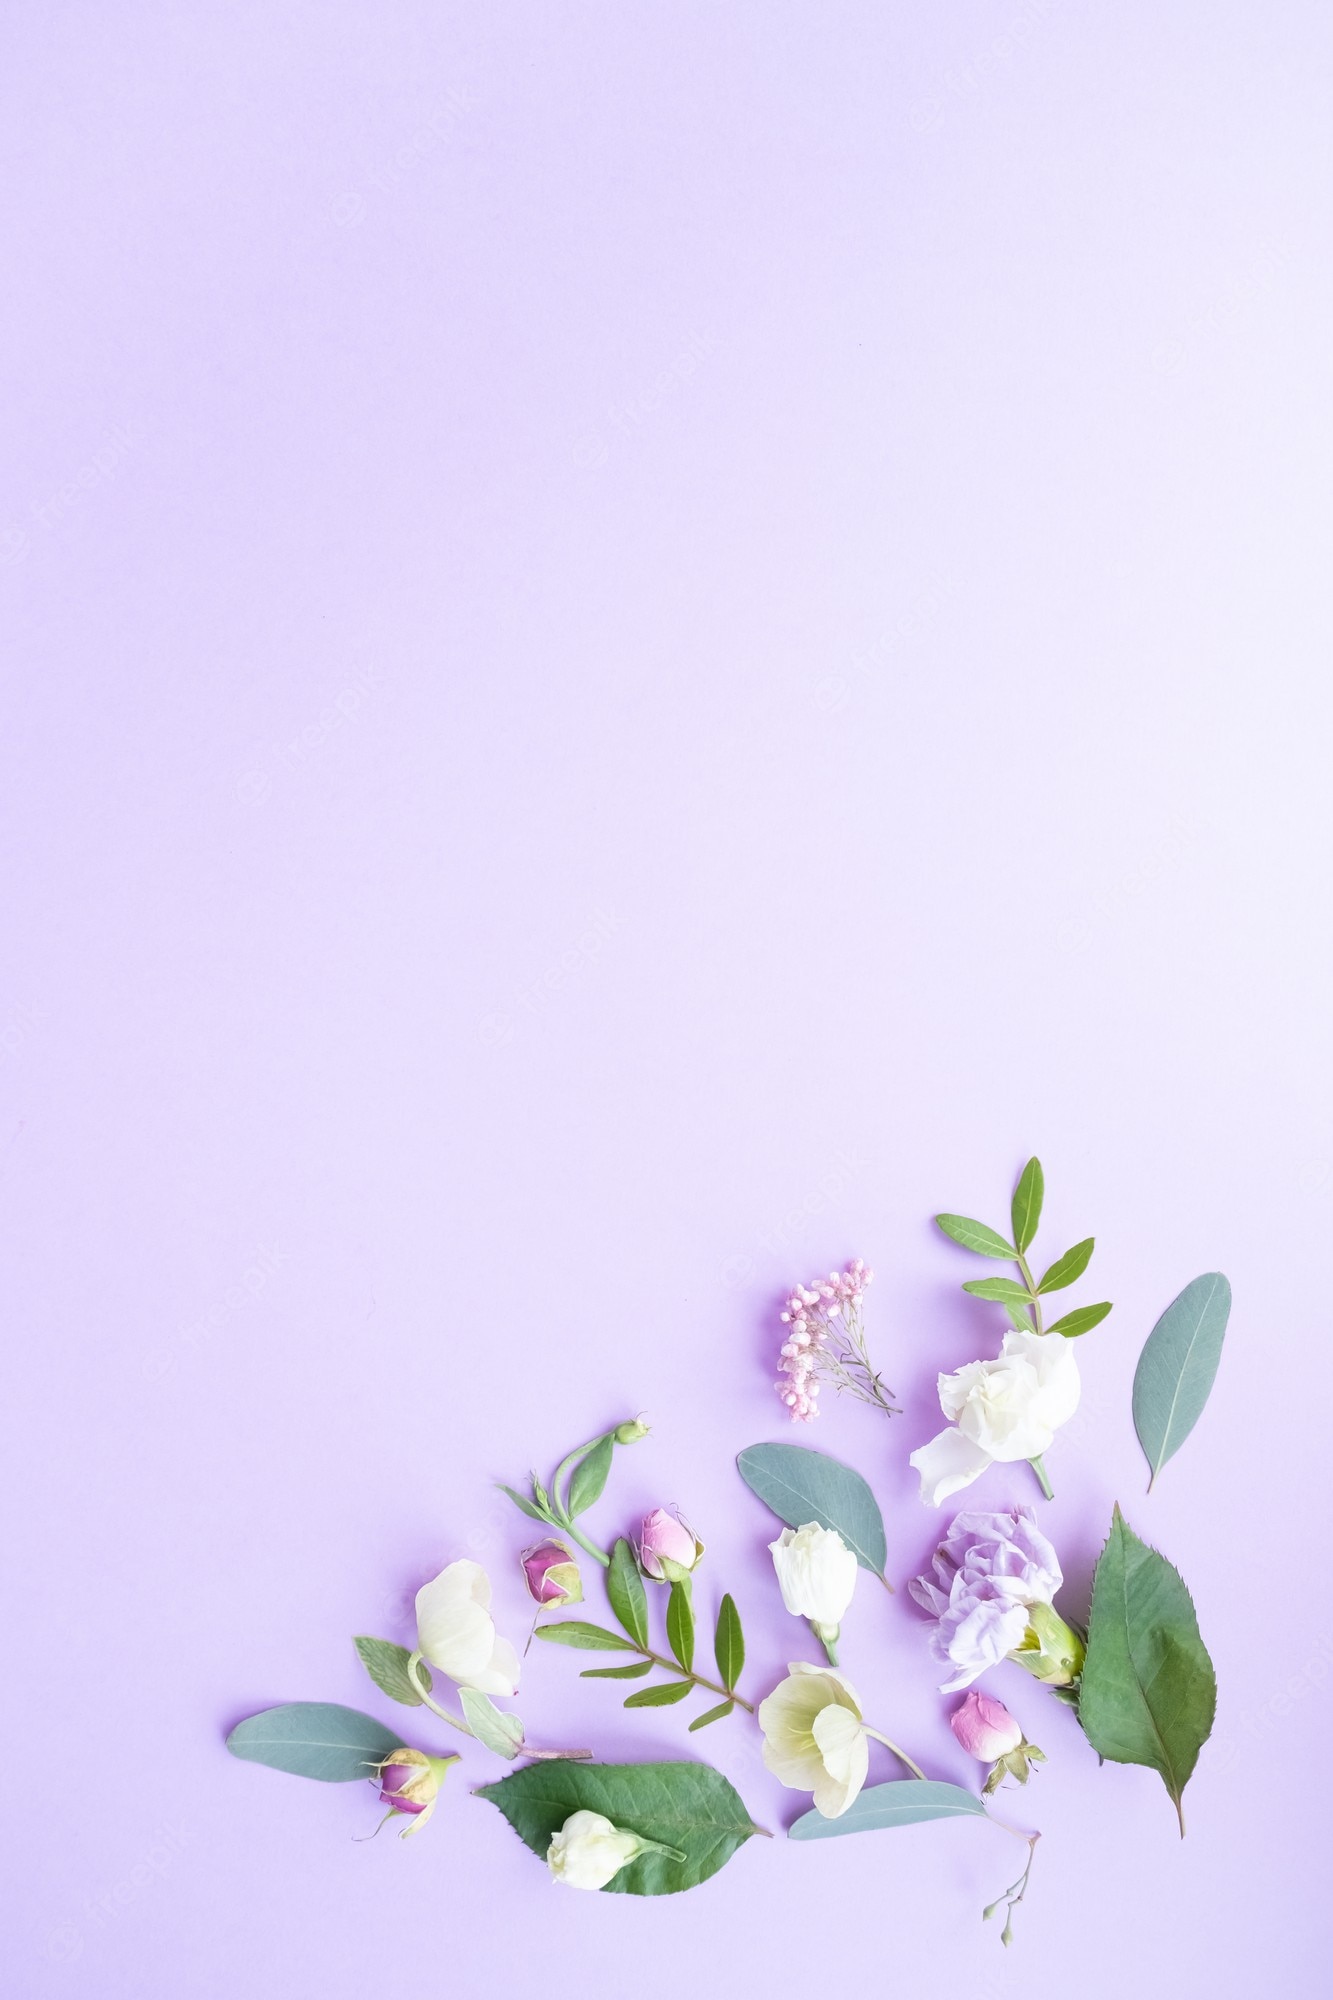 Vintage Flower For Iphone Wallpapers